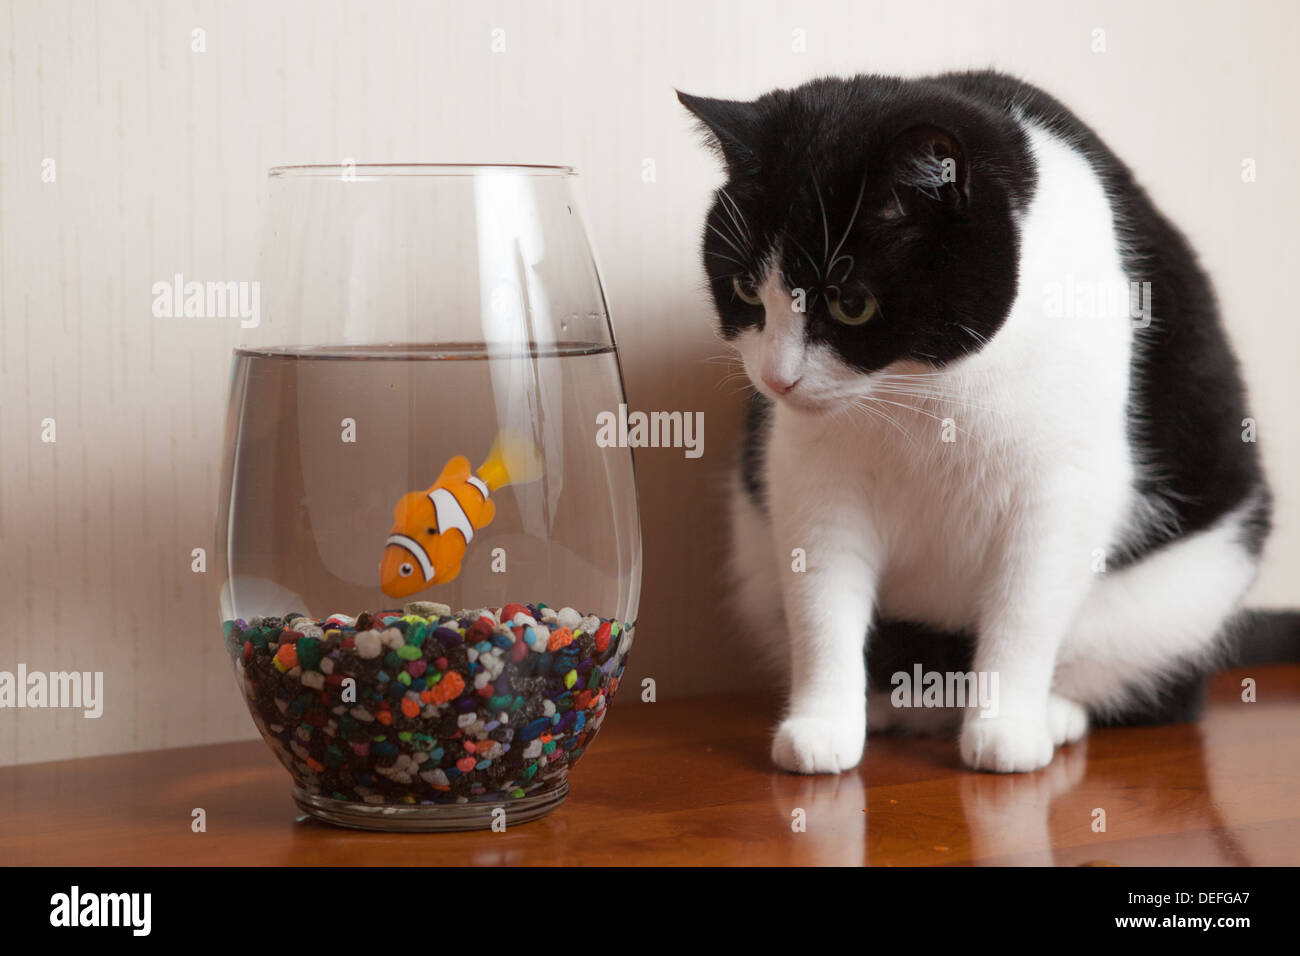 Black and white cat peers in goldfish bowl Stock Photo